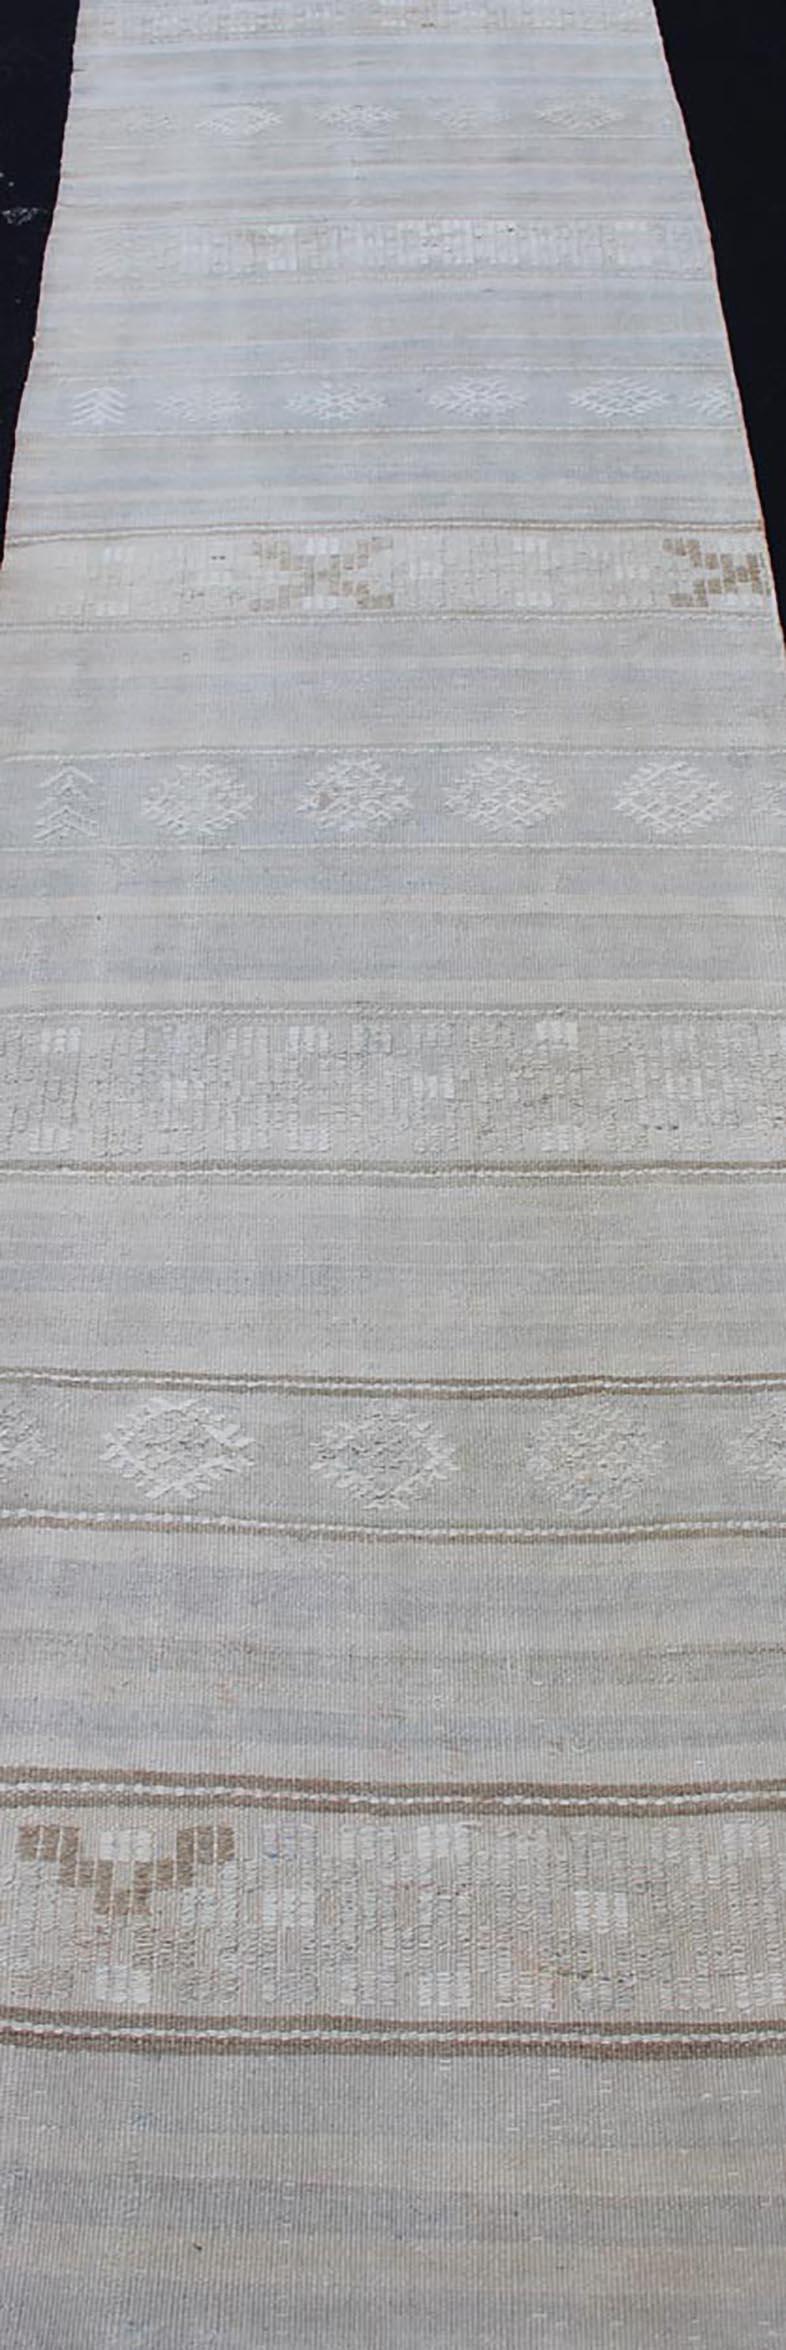 20th Century Vintage Turkish Kilim Runner with Stripes in Light Grey and Muted Tones For Sale